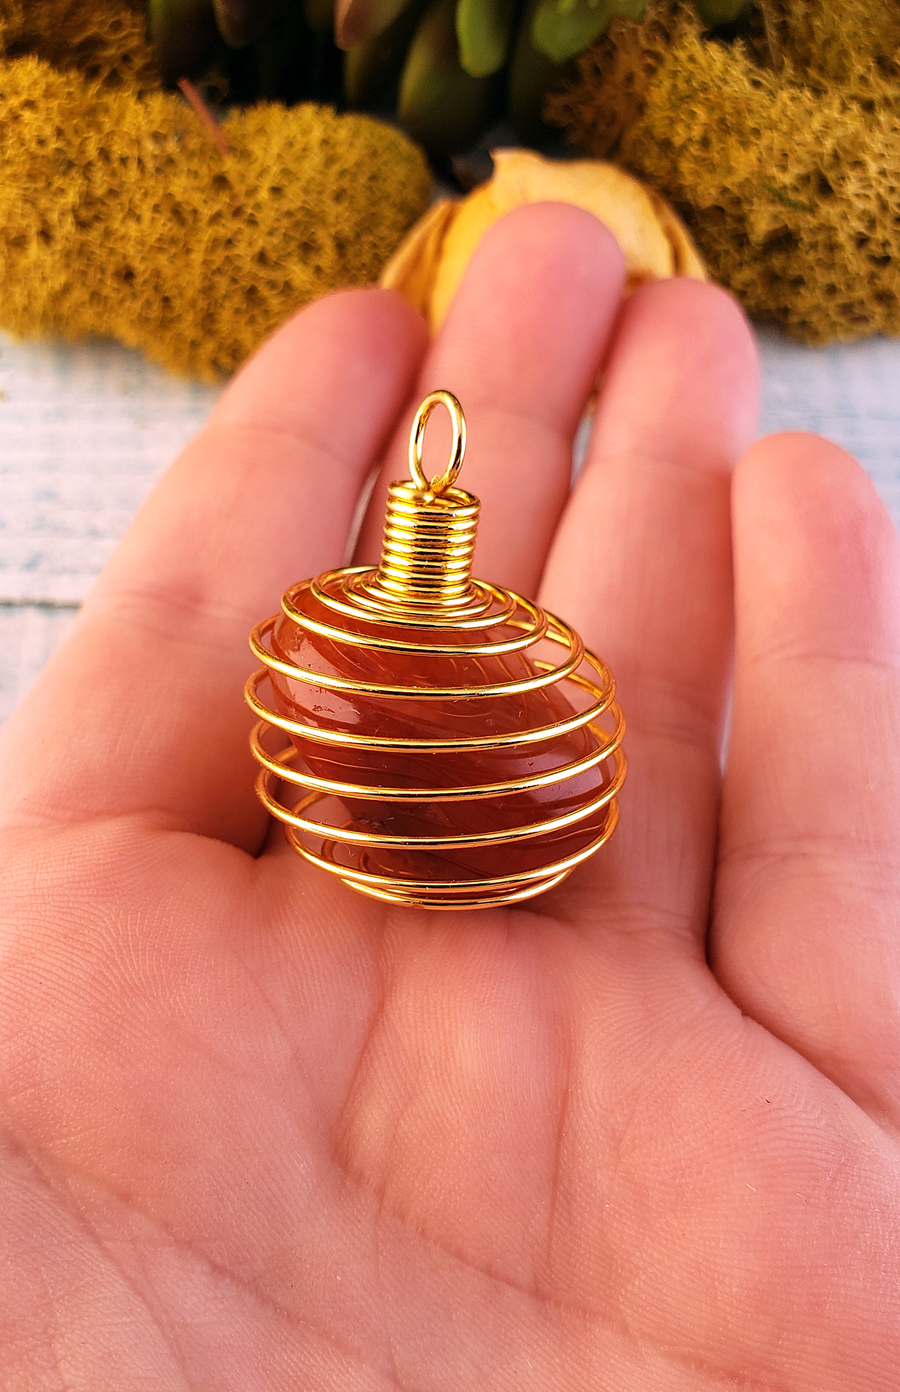 Gold-Colored Metal Spiral Cage Ornament Pendant - Perfect for Holding Gemstones or Orbs! - Carnelian in Pendant